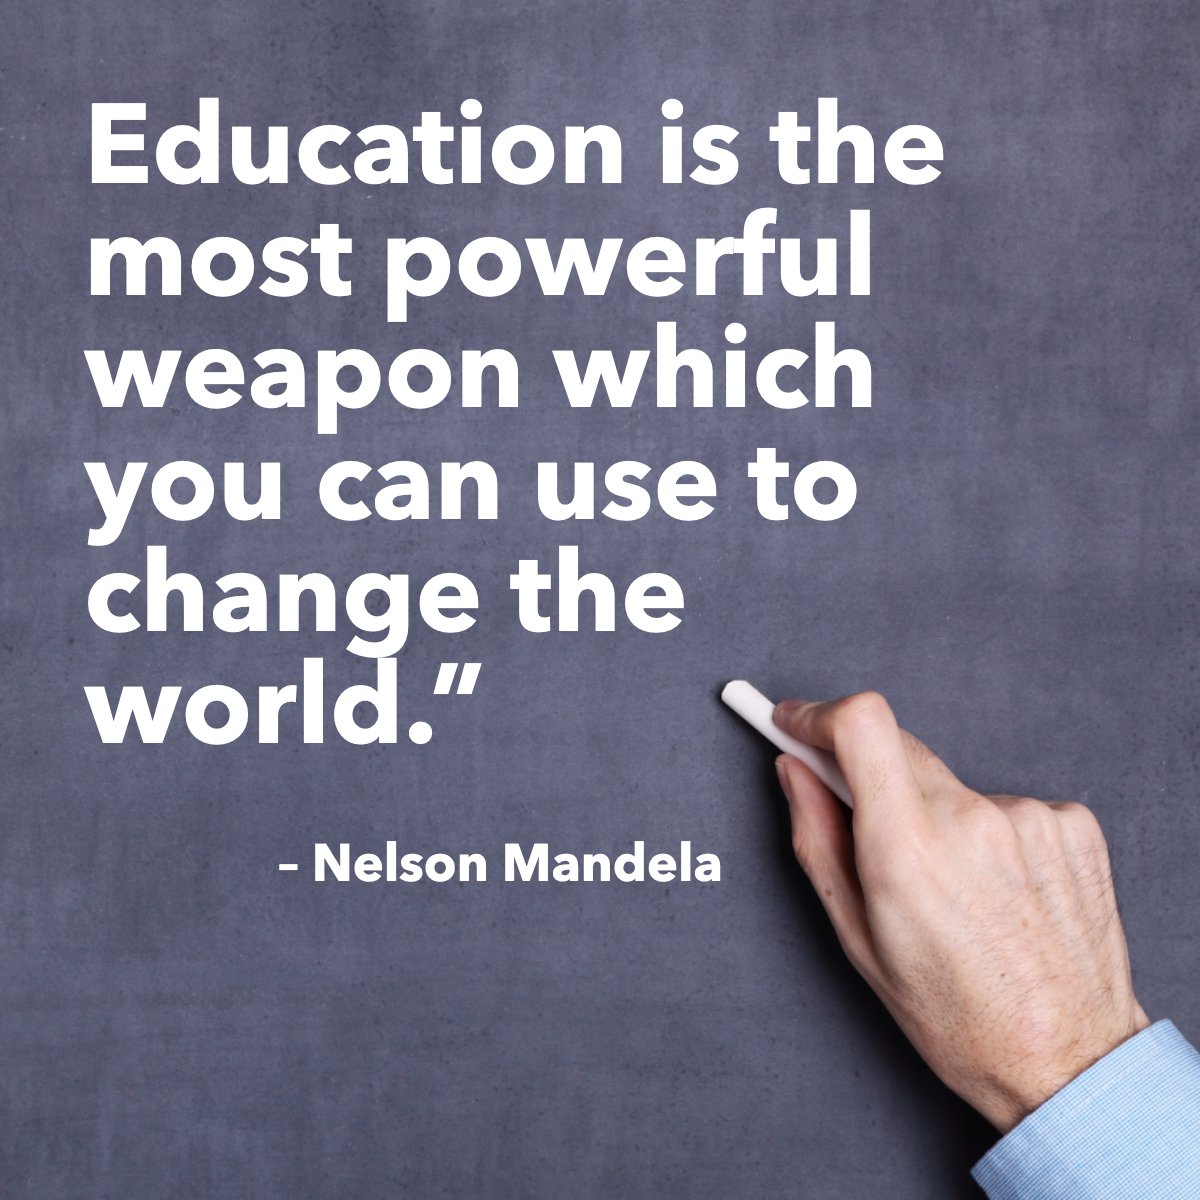 'Education is the most powerful weapon which you can use to change the world' 
— Nelson Mandela  📖

#educationquotes #wisdomquote #wisdomoftheday #quotegram #quoteoftheday #nelsonmandela #educationispower
 #homesalesforce #livinginwoodstockga #johnbthomasjr